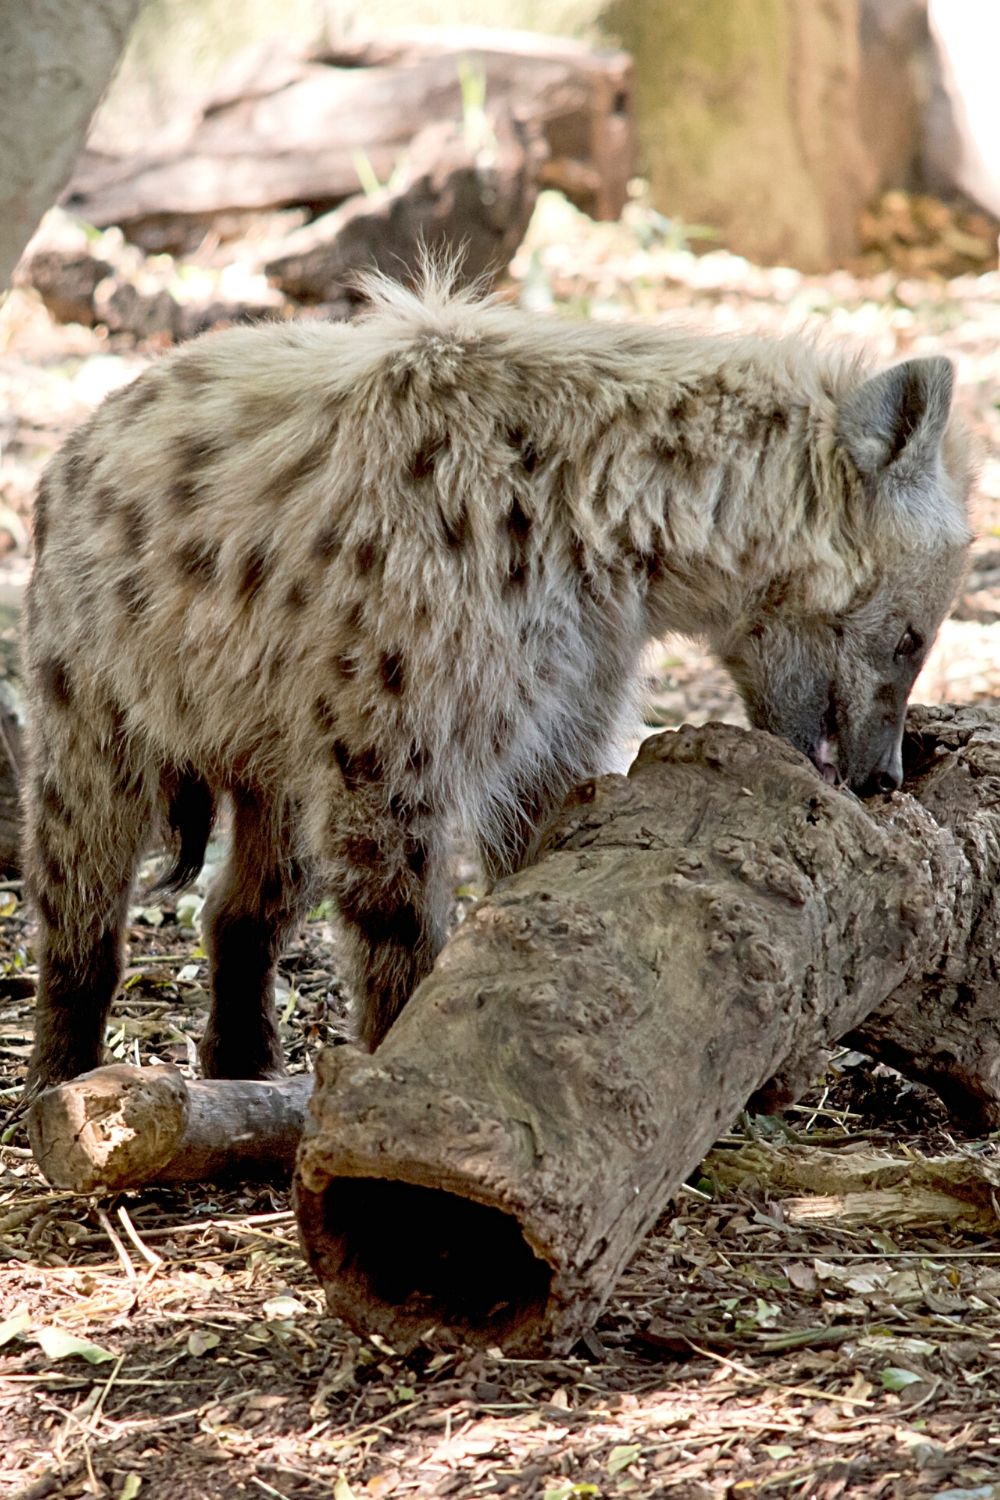 With their powerful jaws and adept digestive systems, hyenas can eat bones, but they'll not touch fur, hooves, and horns